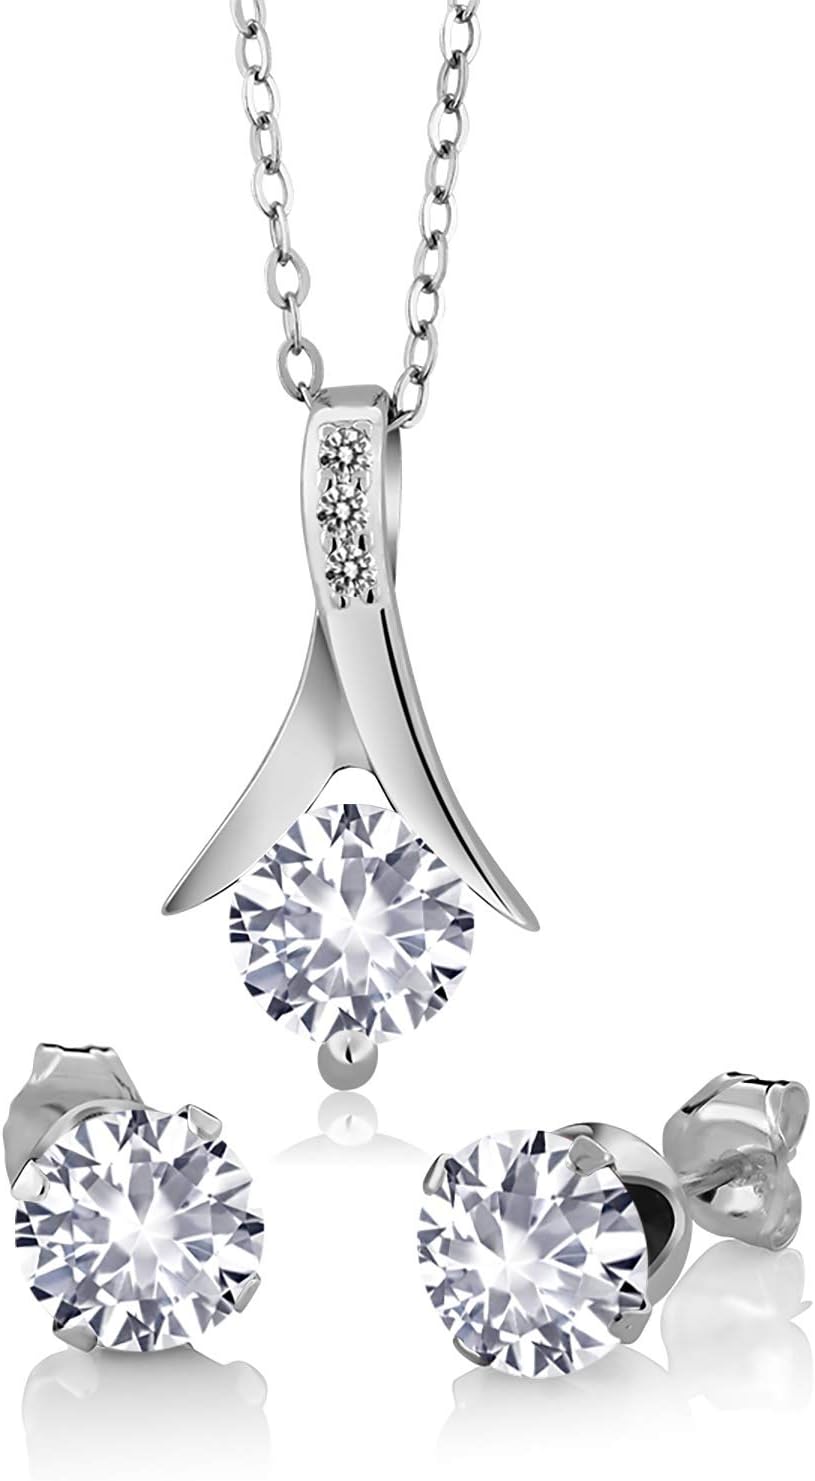 Gem Stone King 925 Sterling Silver White Created Sapphire and White Diamond Pendant and Earrings Jewelry Set For Women (3.65 Cttw, with 18 Inch Silver Chain)